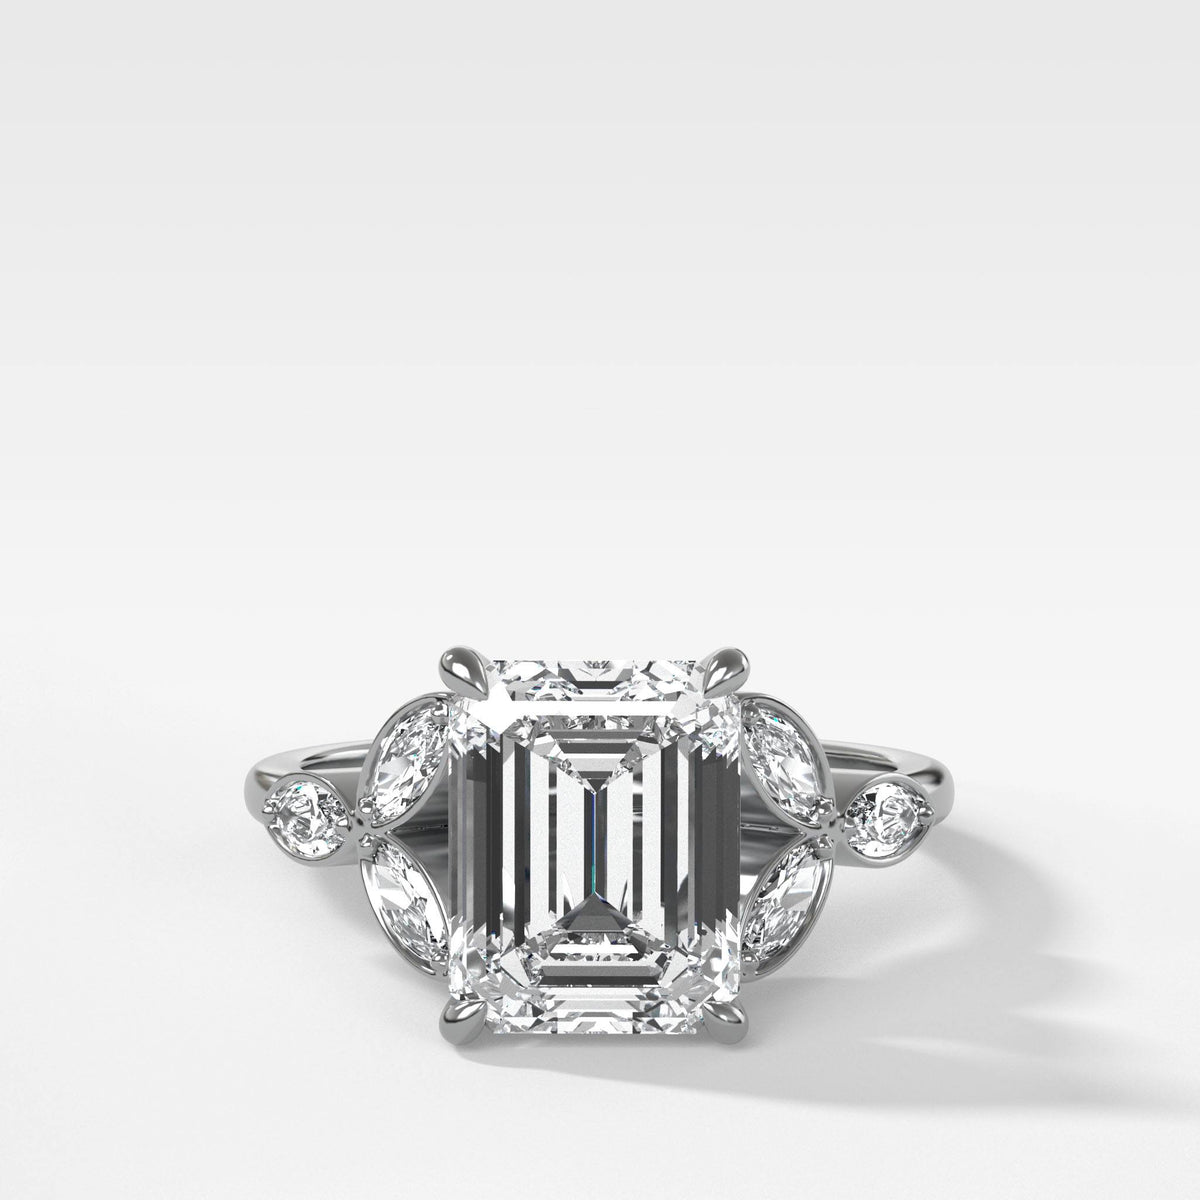 Laurel Ring With North South Emerald Cut by Good Stone in White Gold